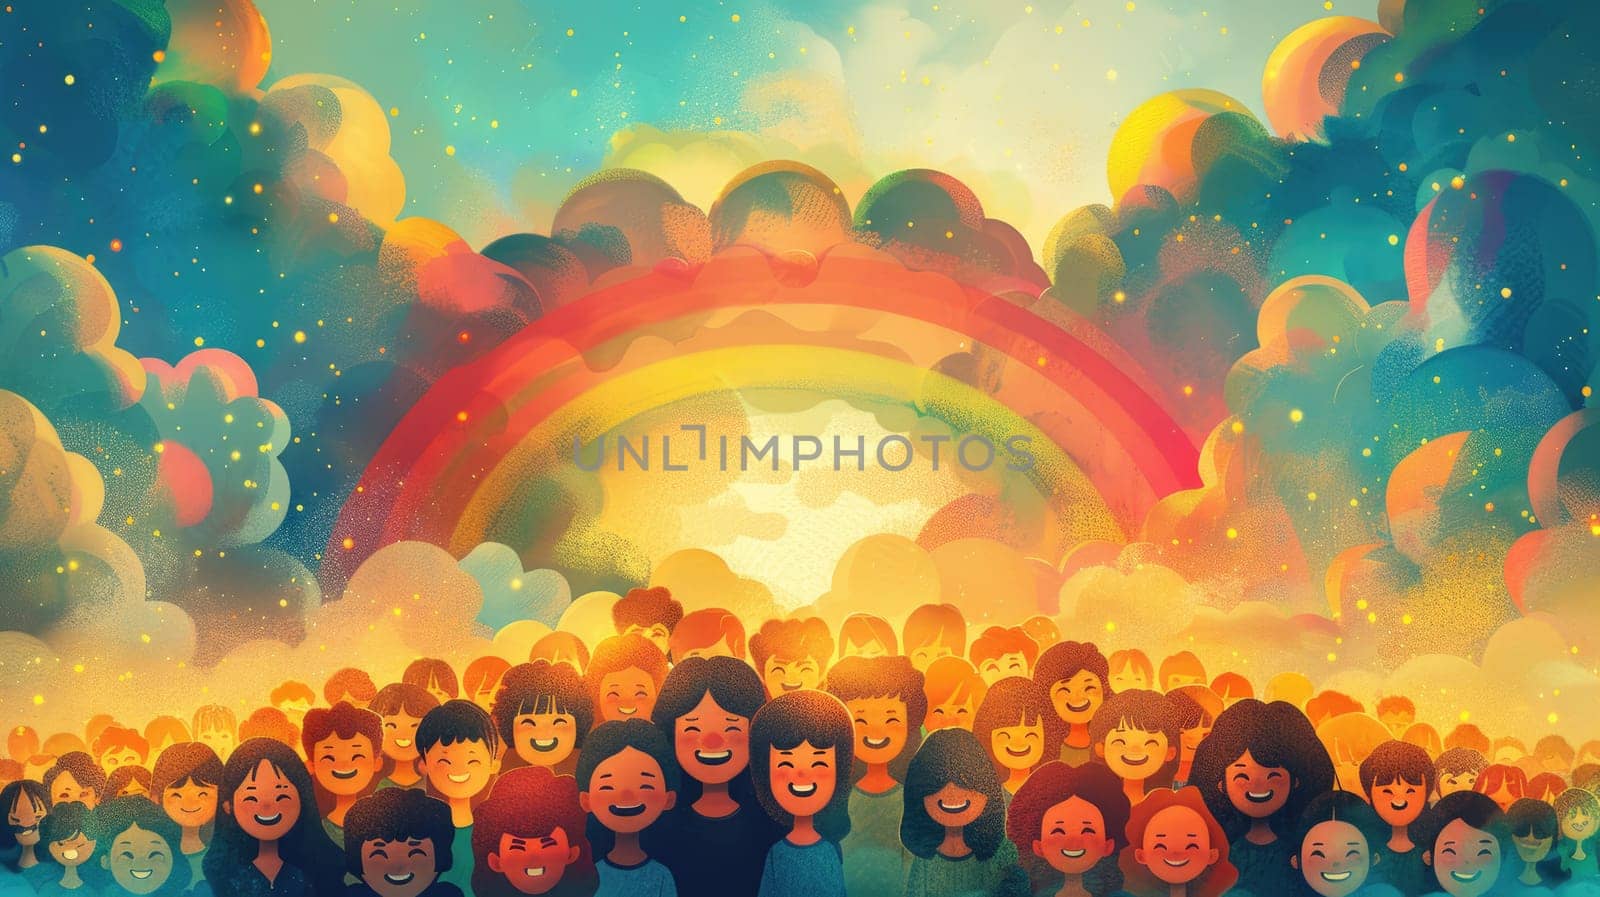 A colorful poster featuring an illustration of a rainbow arching across a sky filled with diverse, smiling faces, set against a pastel background, symbolizing pride and unity.